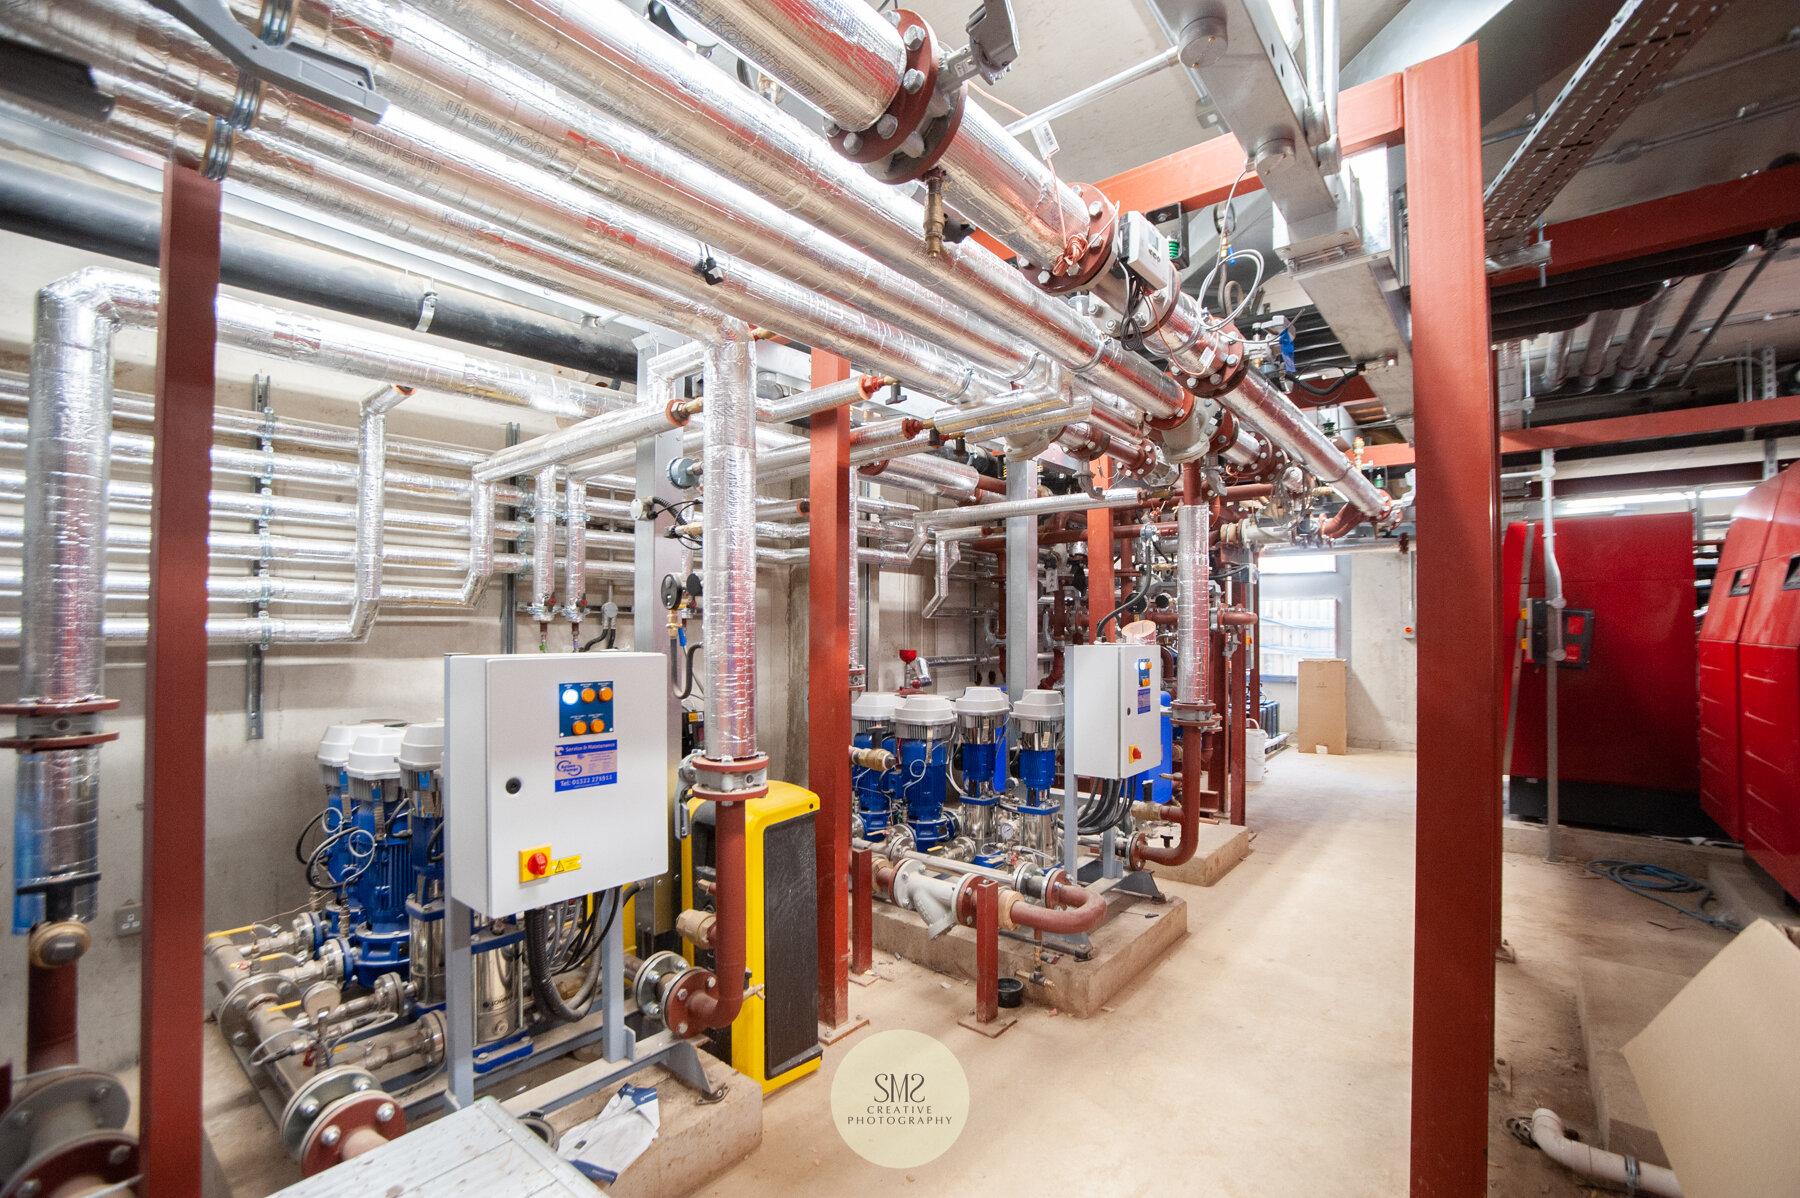  The same plant room showing the boilers and pumps for water and heating to service all the flats in all three blocks. 